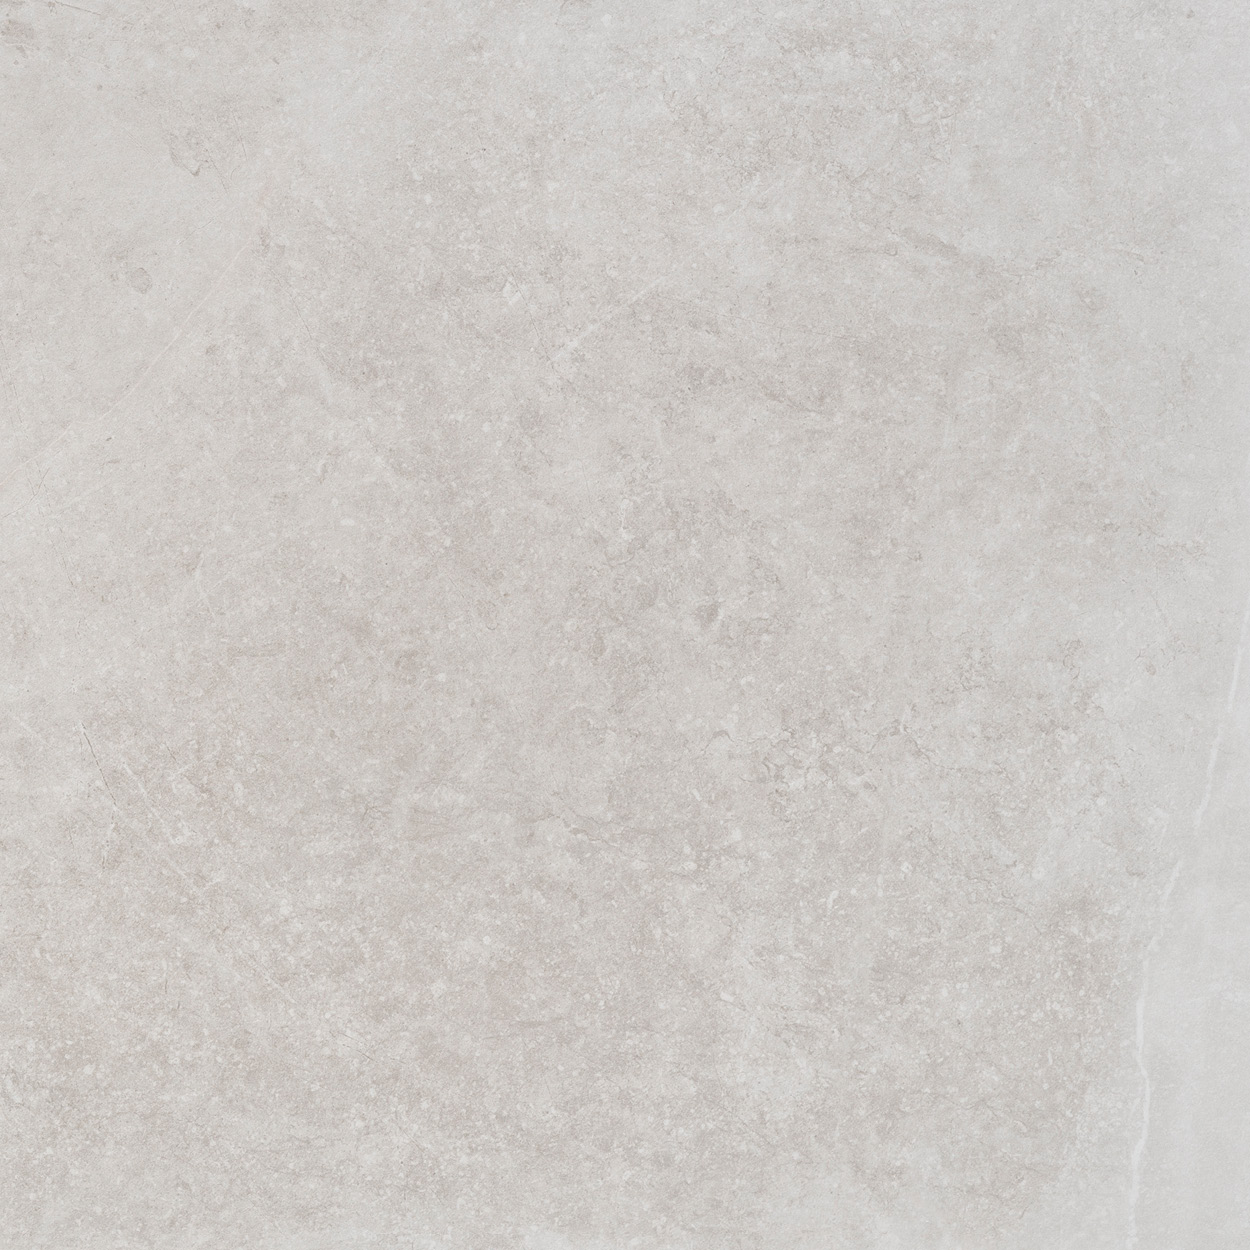 24 x 48 Evo Stone Ivory GRIP finished Rectified Porcelain Tile (SPECIAL ORDER ONLY)